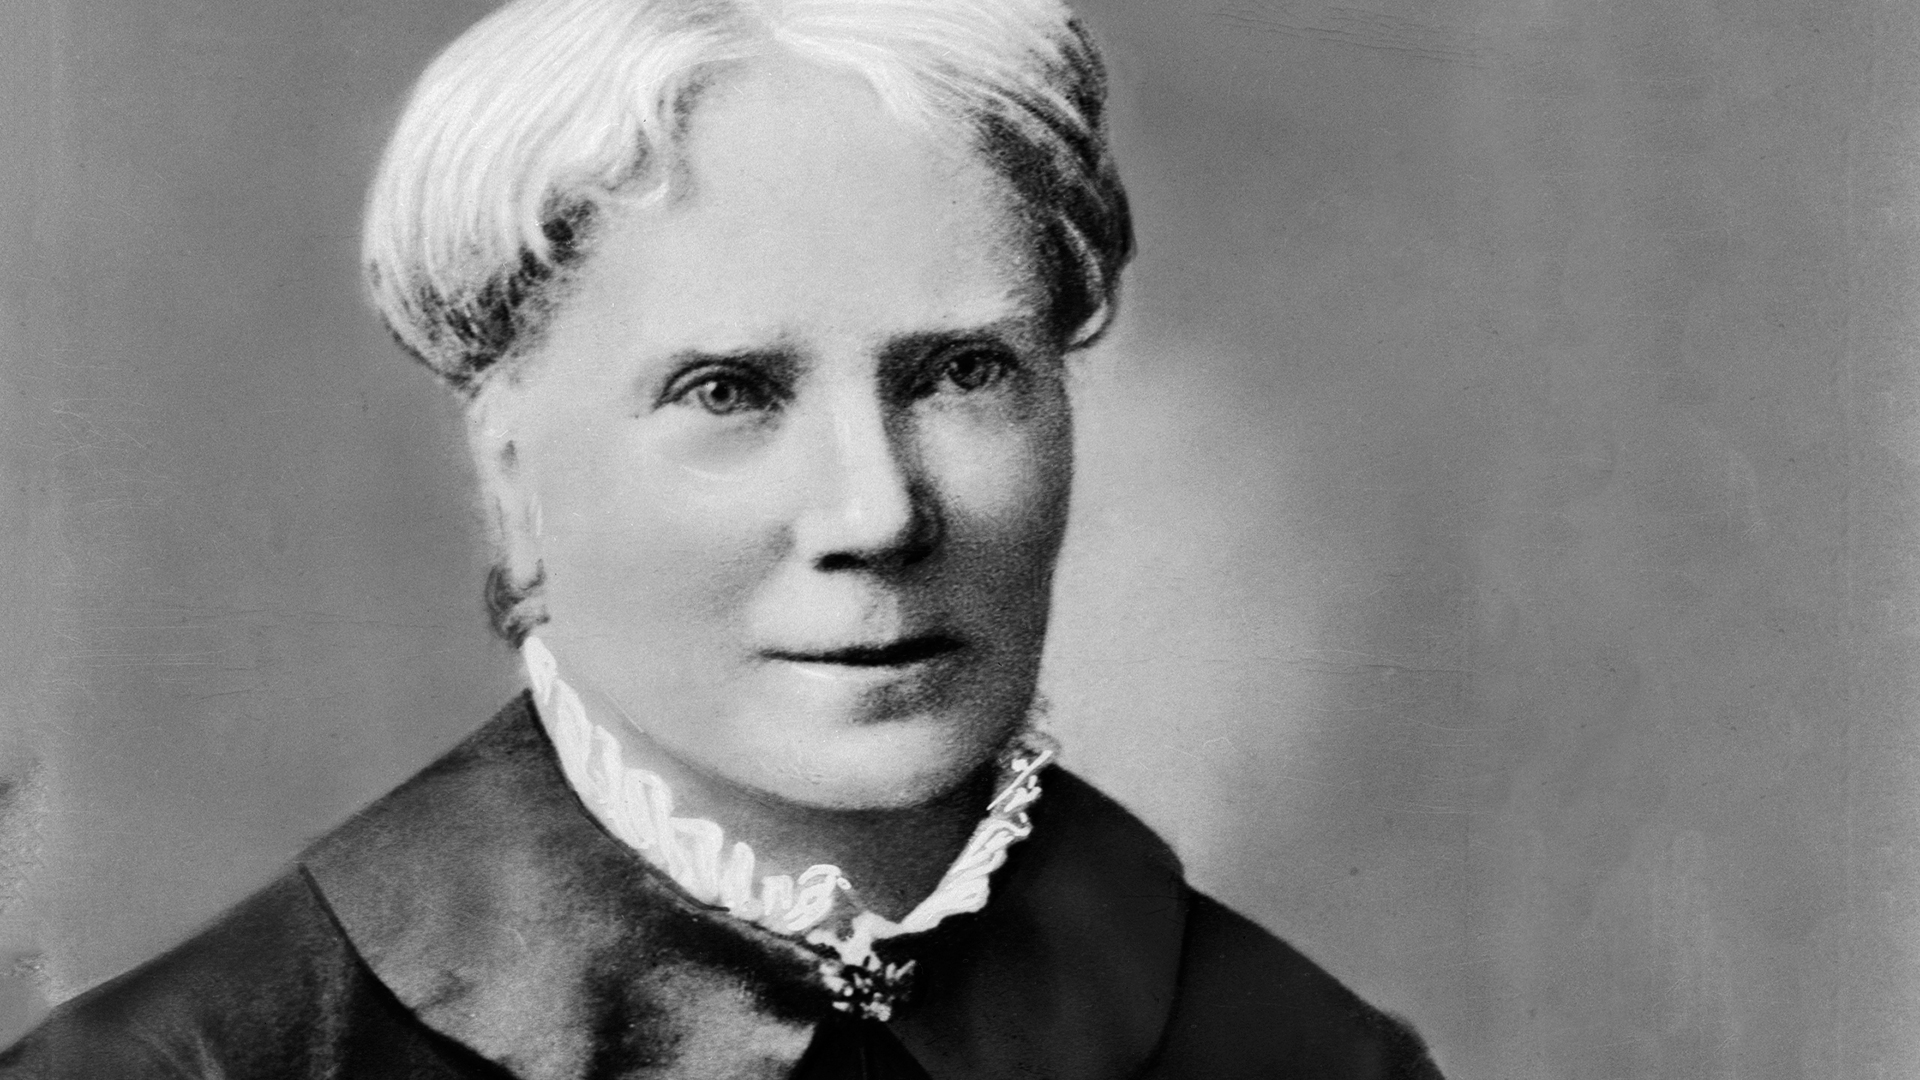 January 23, 1849: Elizabeth Blackwell Became the First Woman in the United States to Earn a Medical Degree